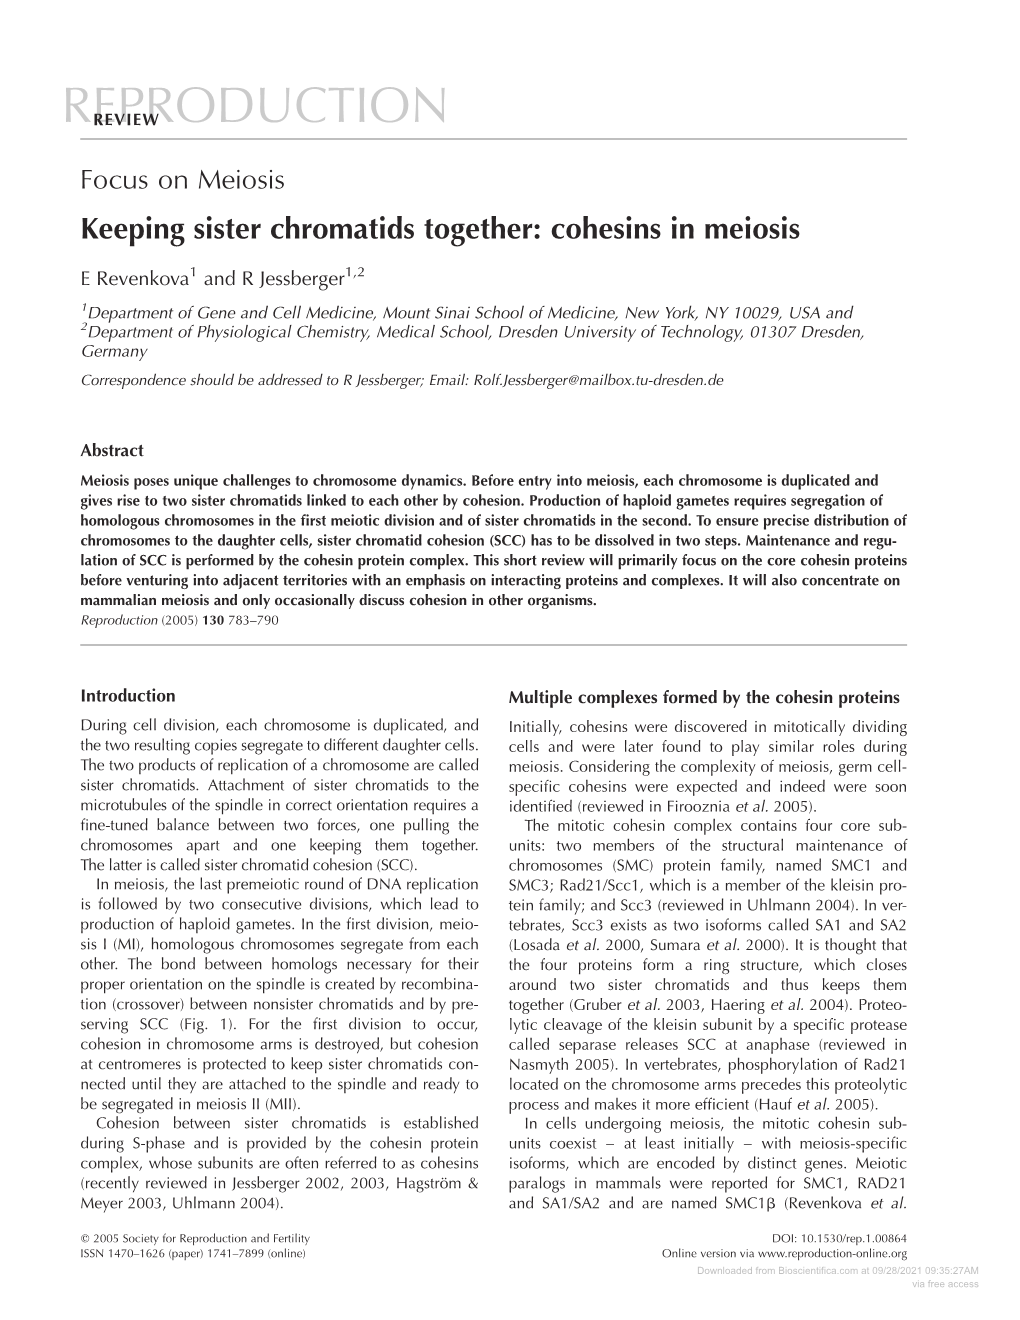 Keeping Sister Chromatids Together: Cohesins in Meiosis